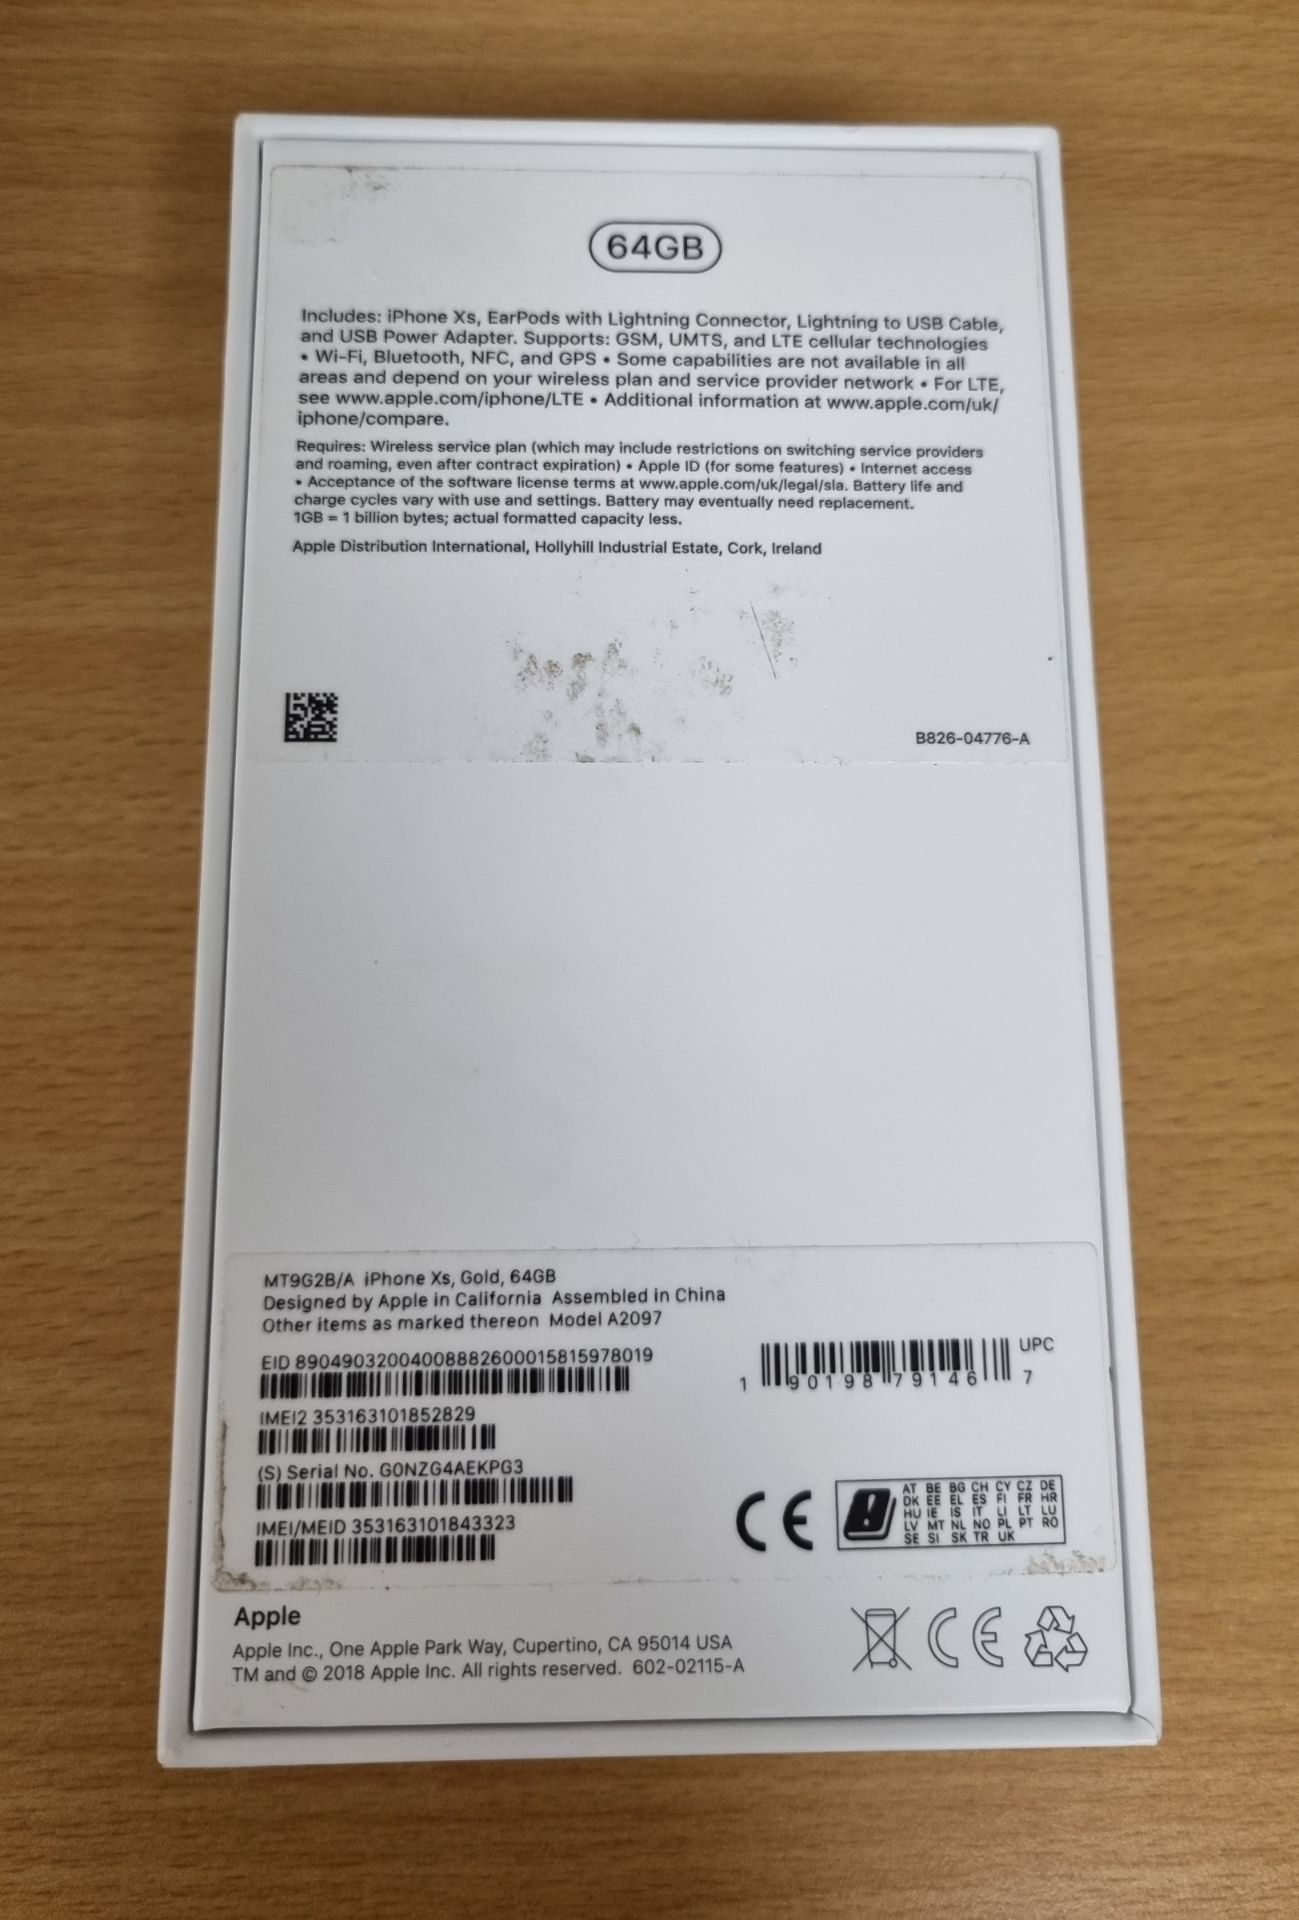 Apple iPhone XS (boxed) – Gold – 64GB – MT9G2B/A – Serial number G0NZG4AEKPG3 - Image 8 of 8